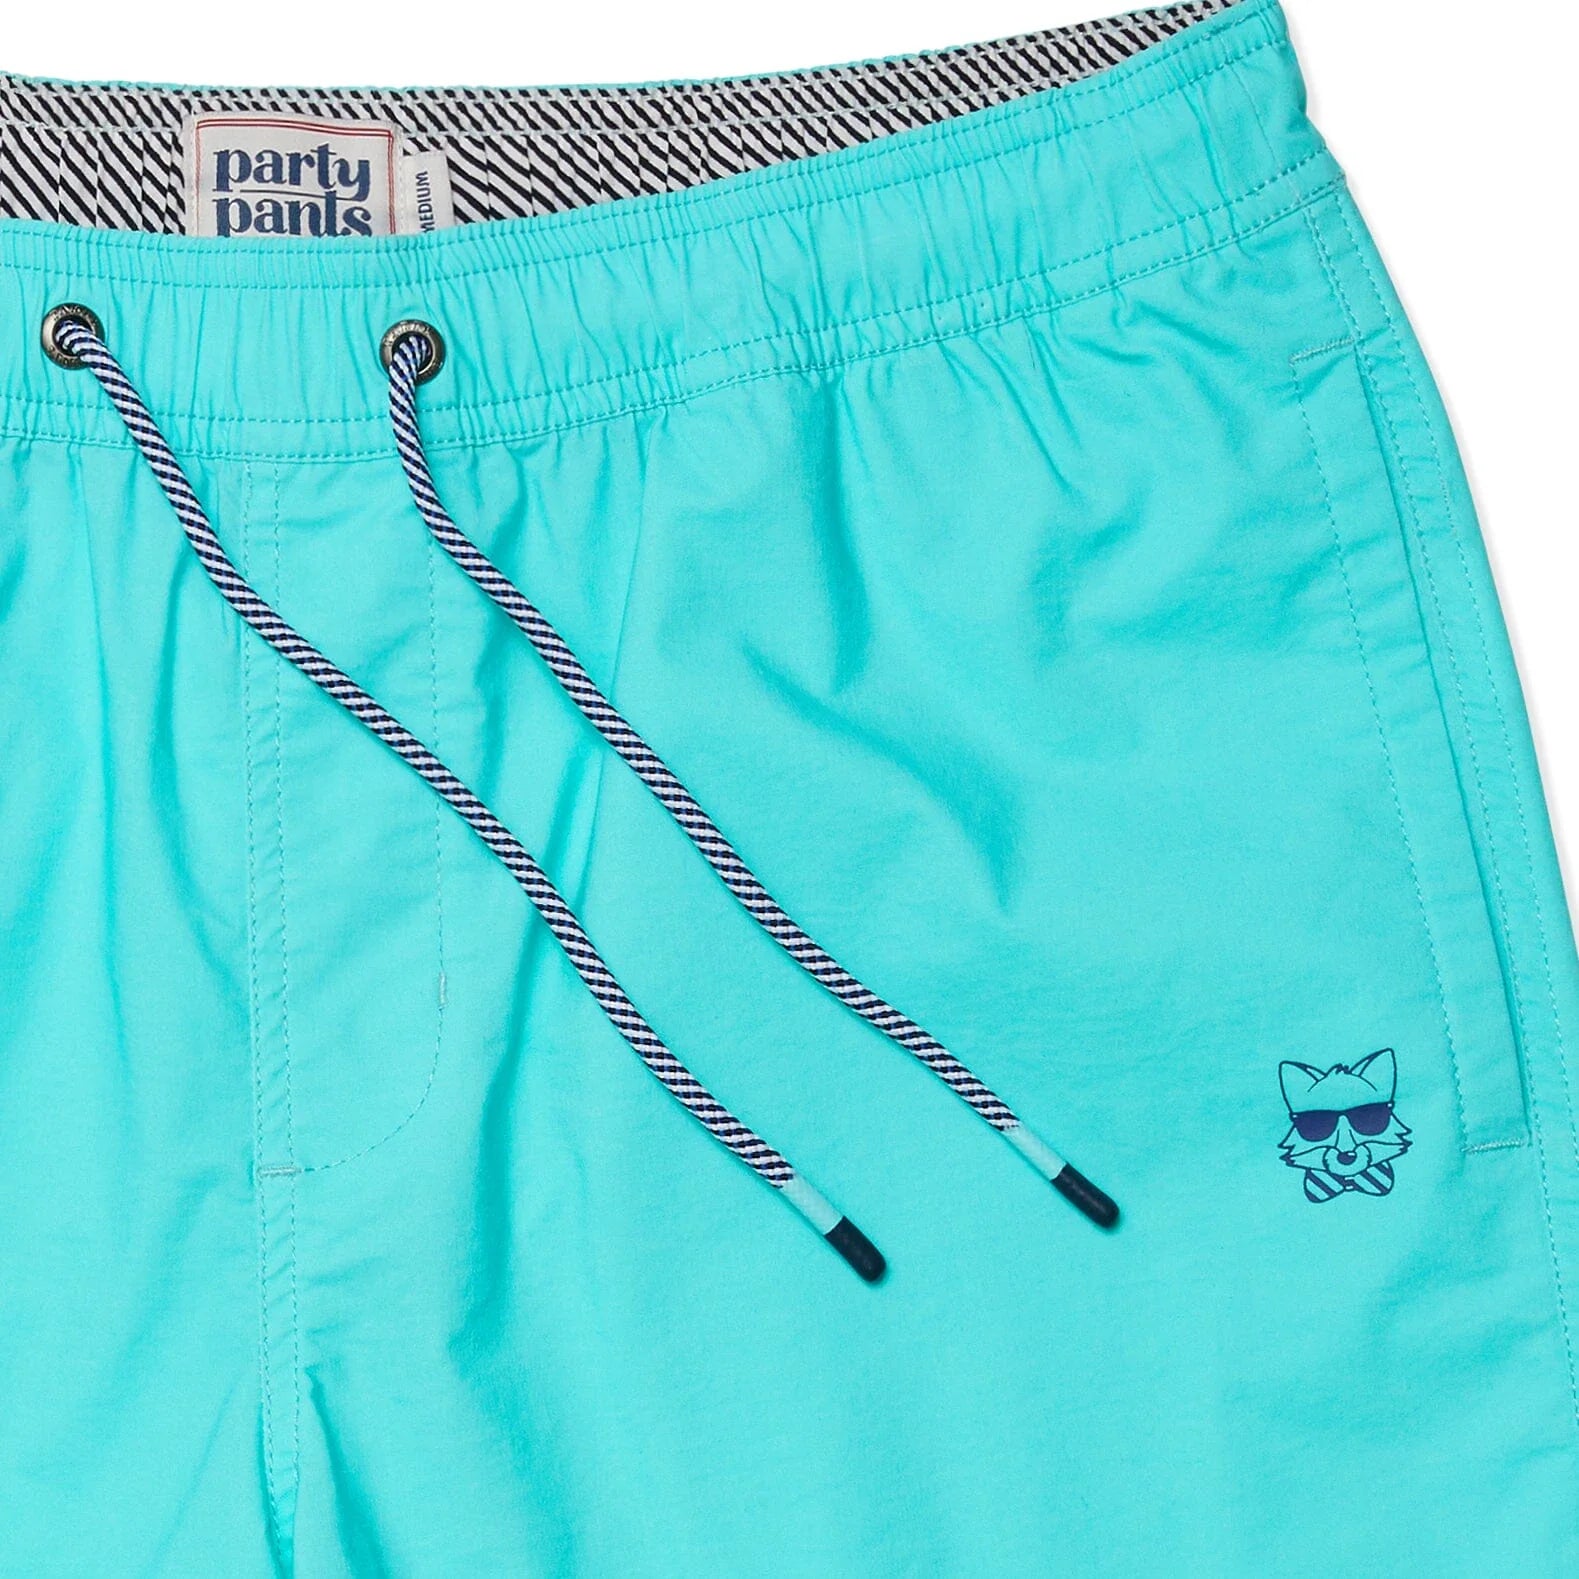 The Solid Party Starter Short in blue